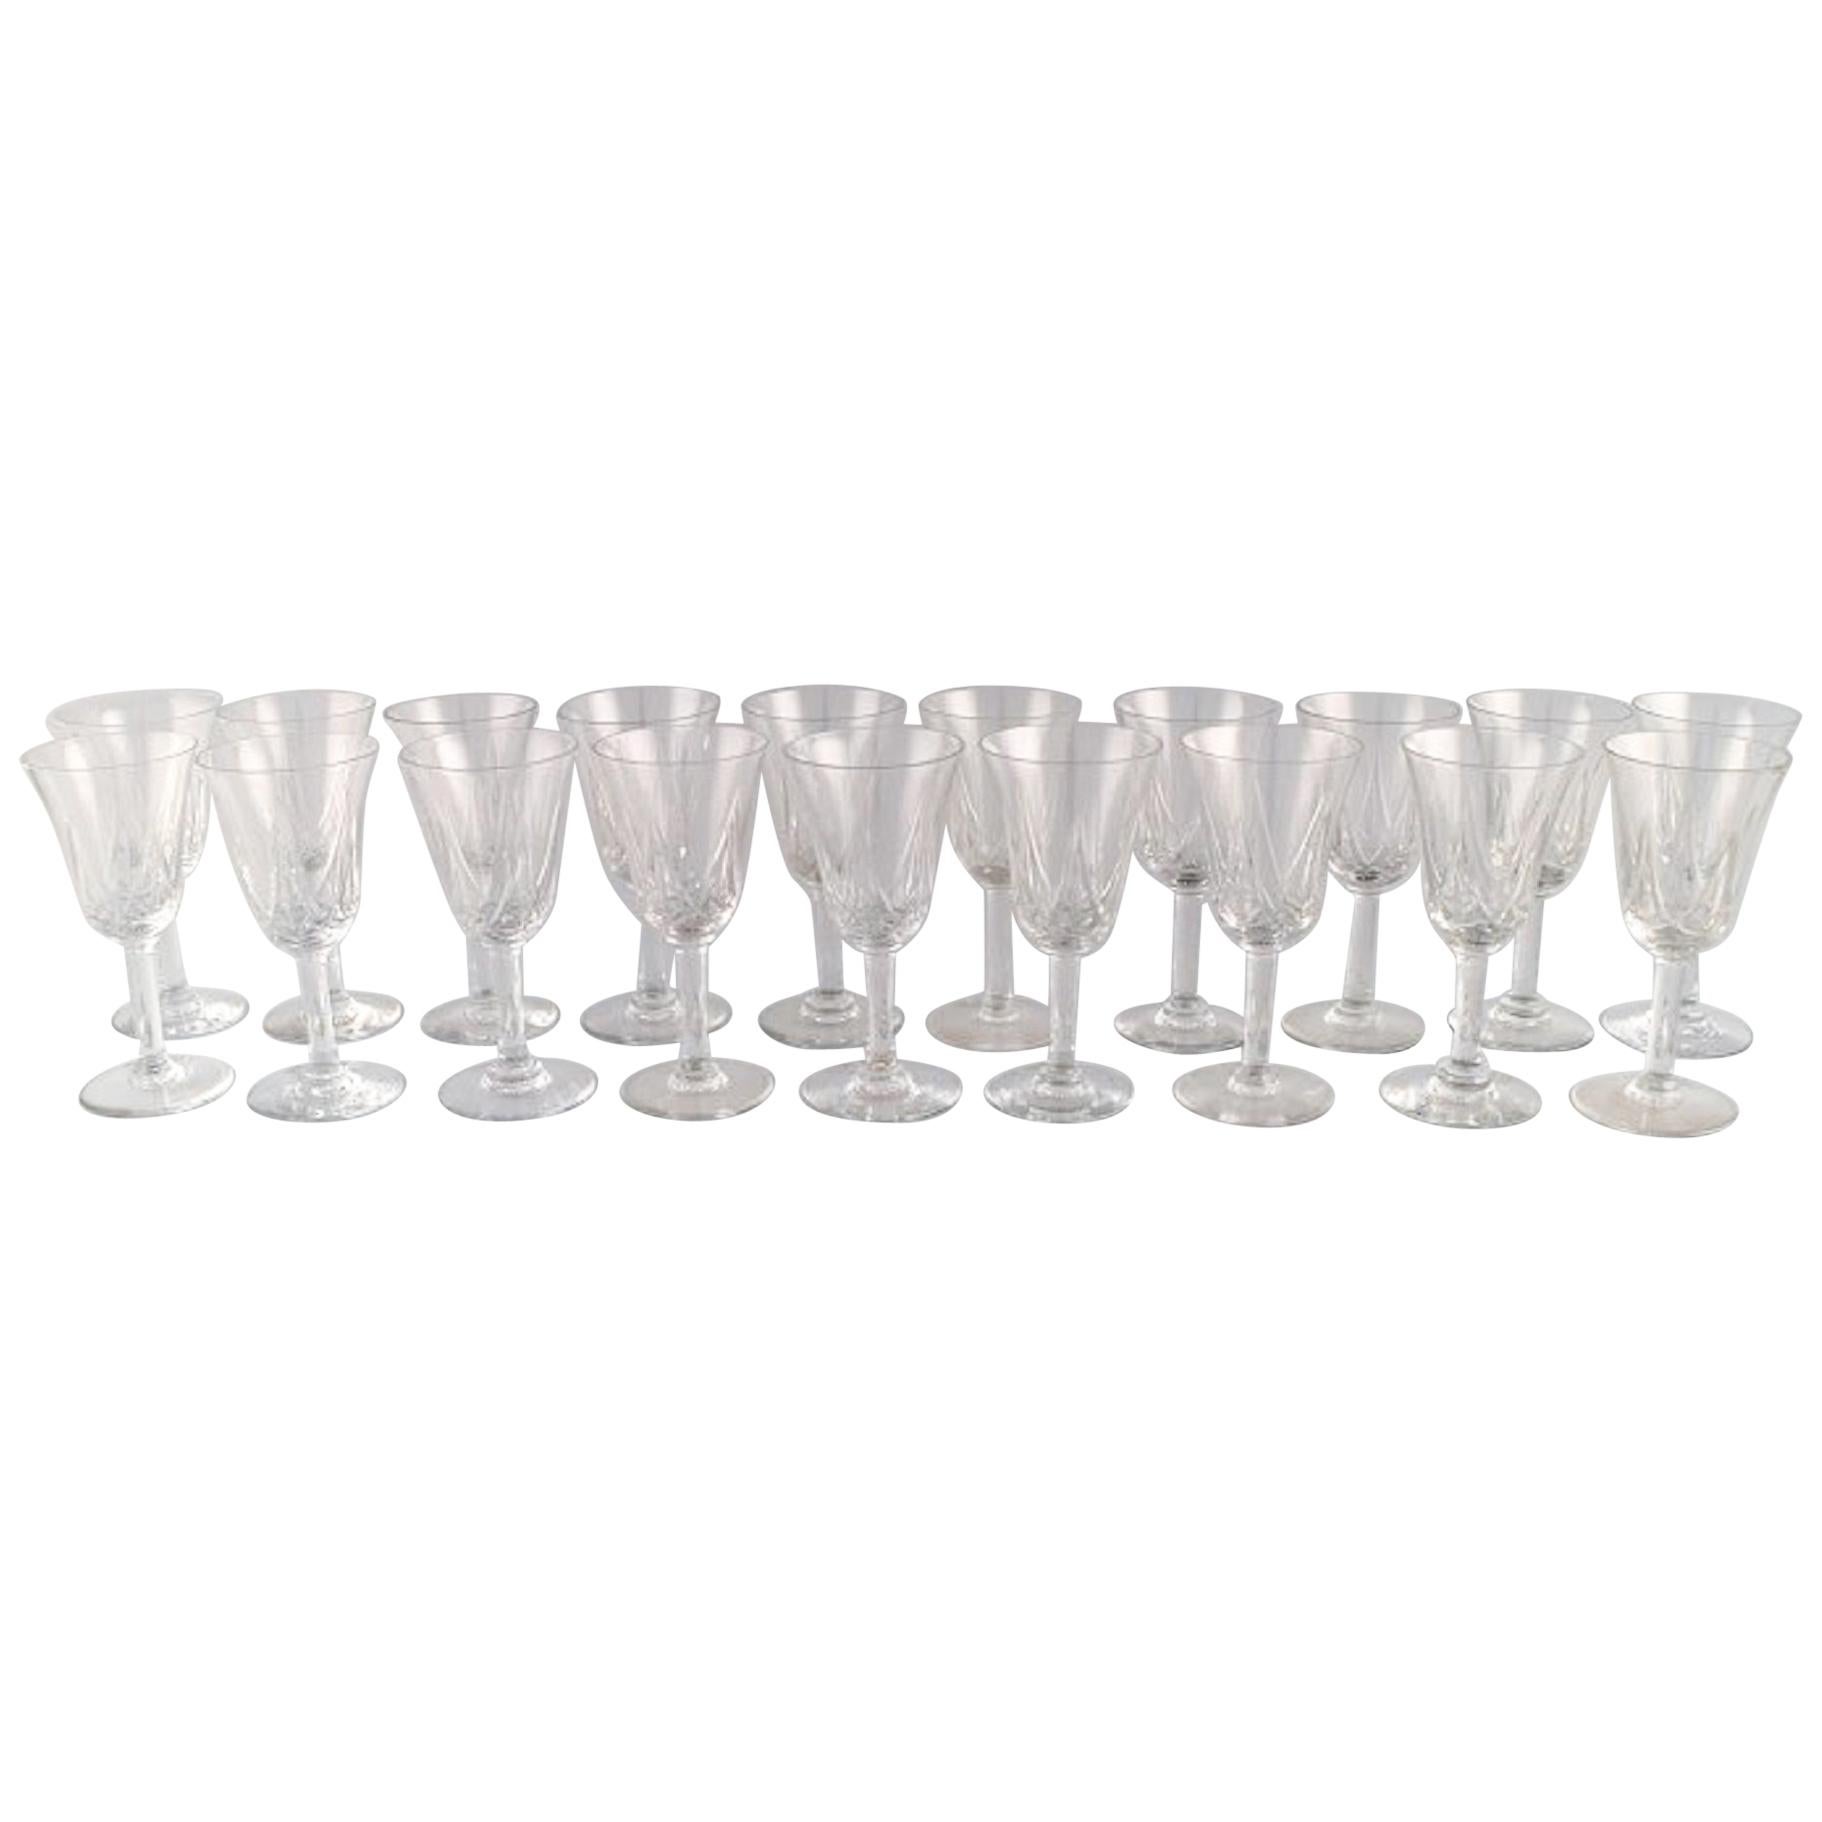 St. Louis, Belgium, 19 Glasses in Mouth Blown Crystal Glass, 1930s-1940s For Sale